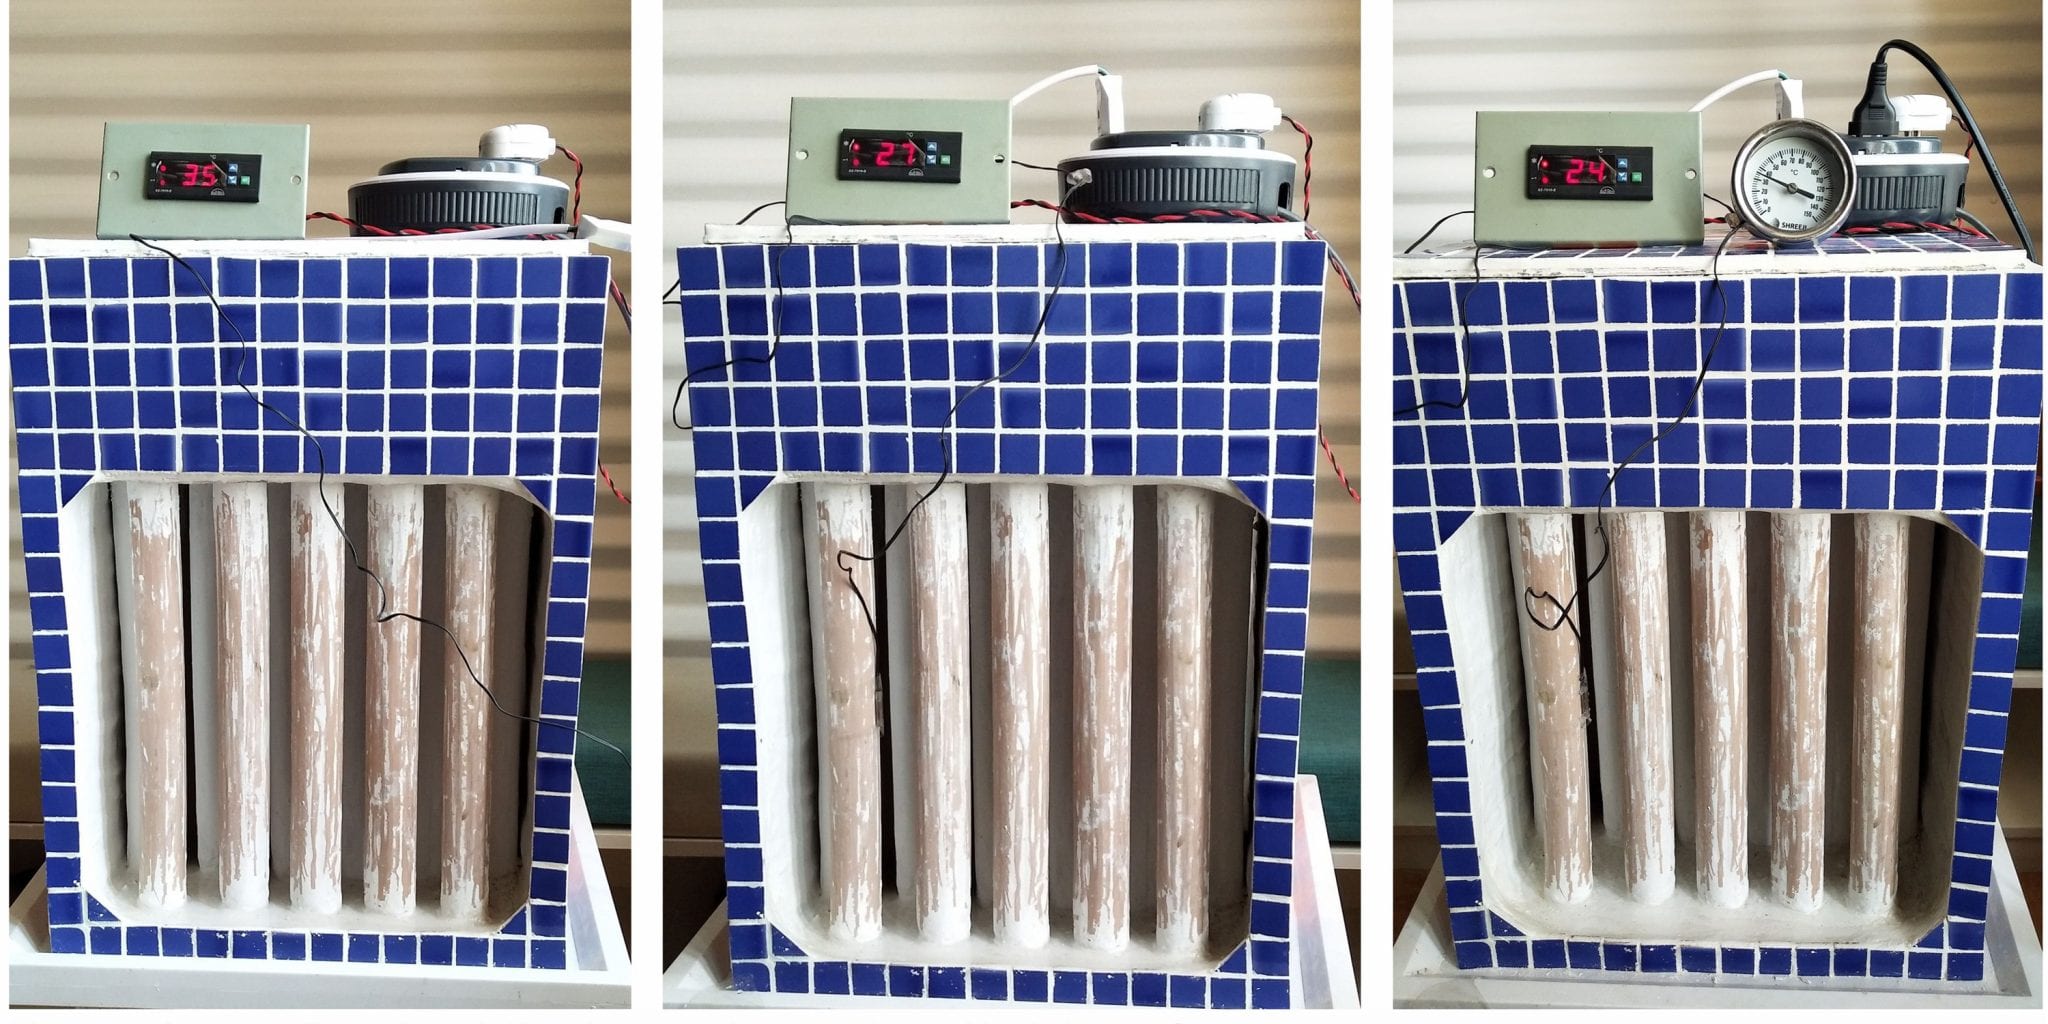 Designed: This Air Conditioner for Homes and Offices Uses No Electricity | Engineering For Change